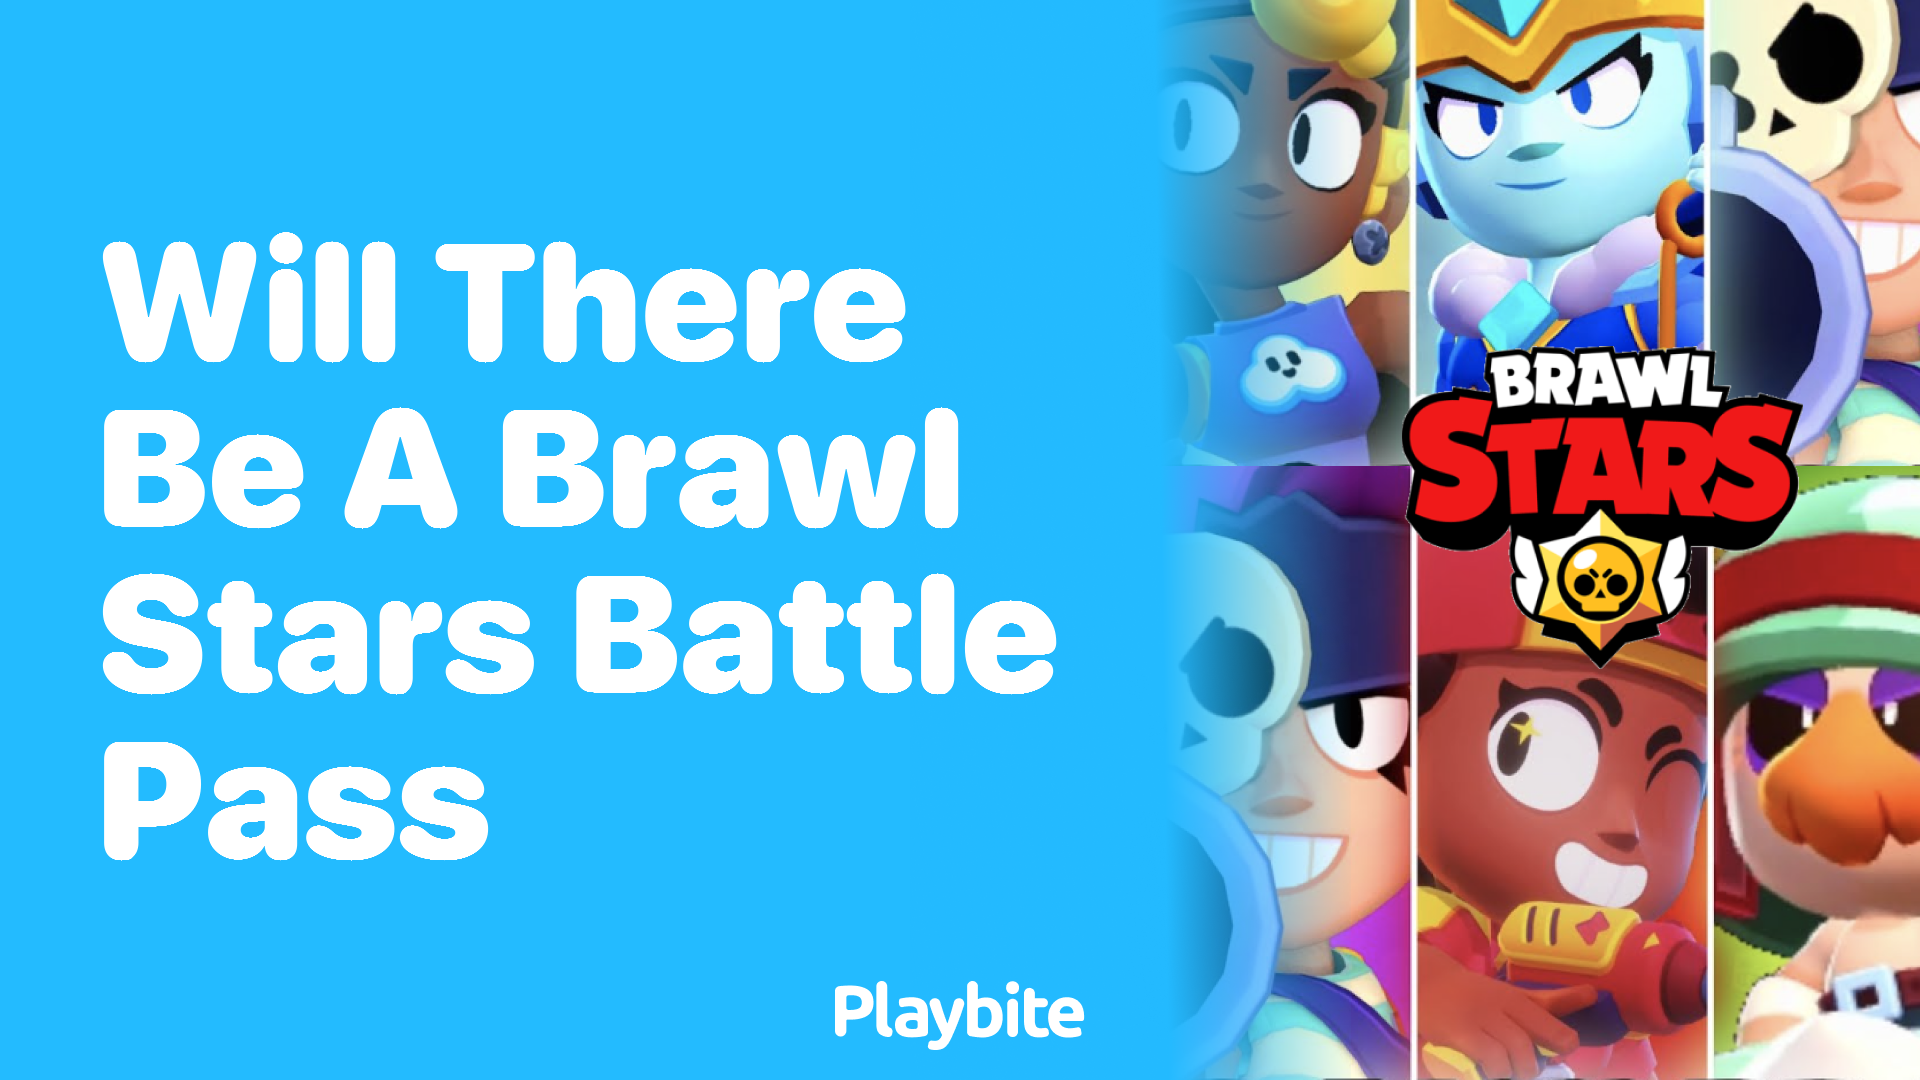 Will There Be a Brawl Stars Battle Pass?